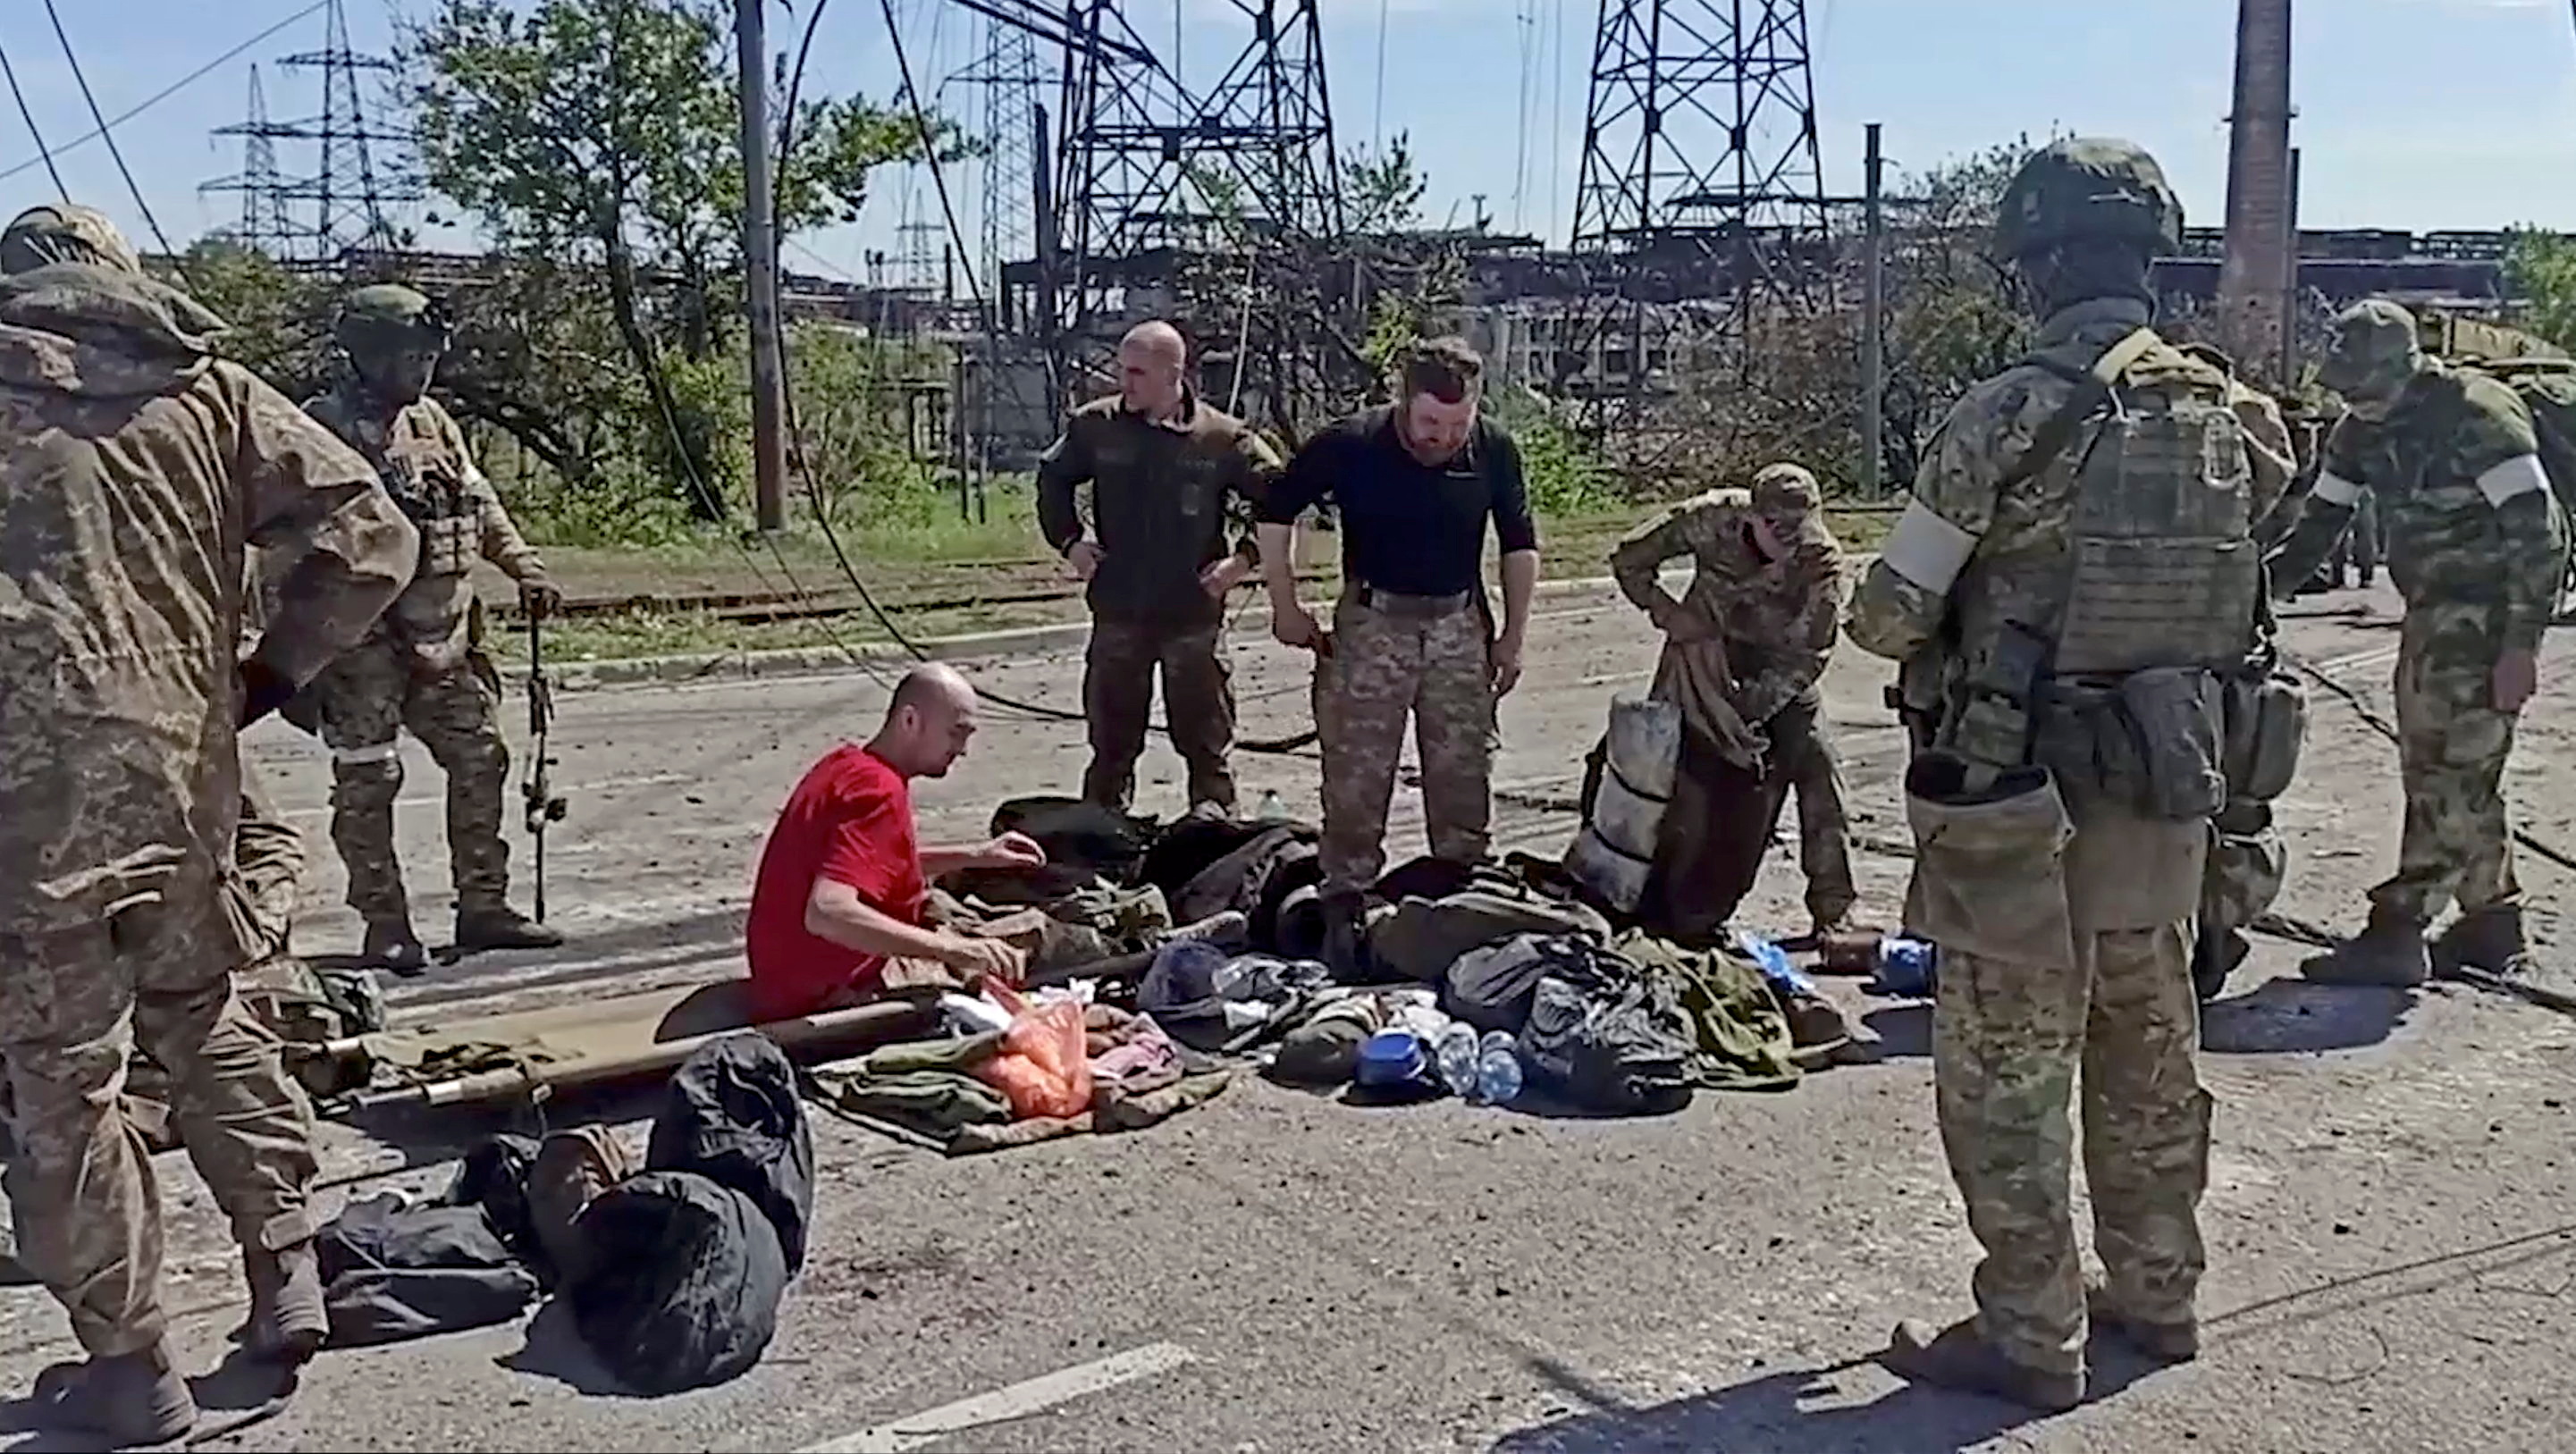 Service members of Ukrainian forces who have surrendered after weeks holed up at Azovstal steel works are being searched in Mariupol